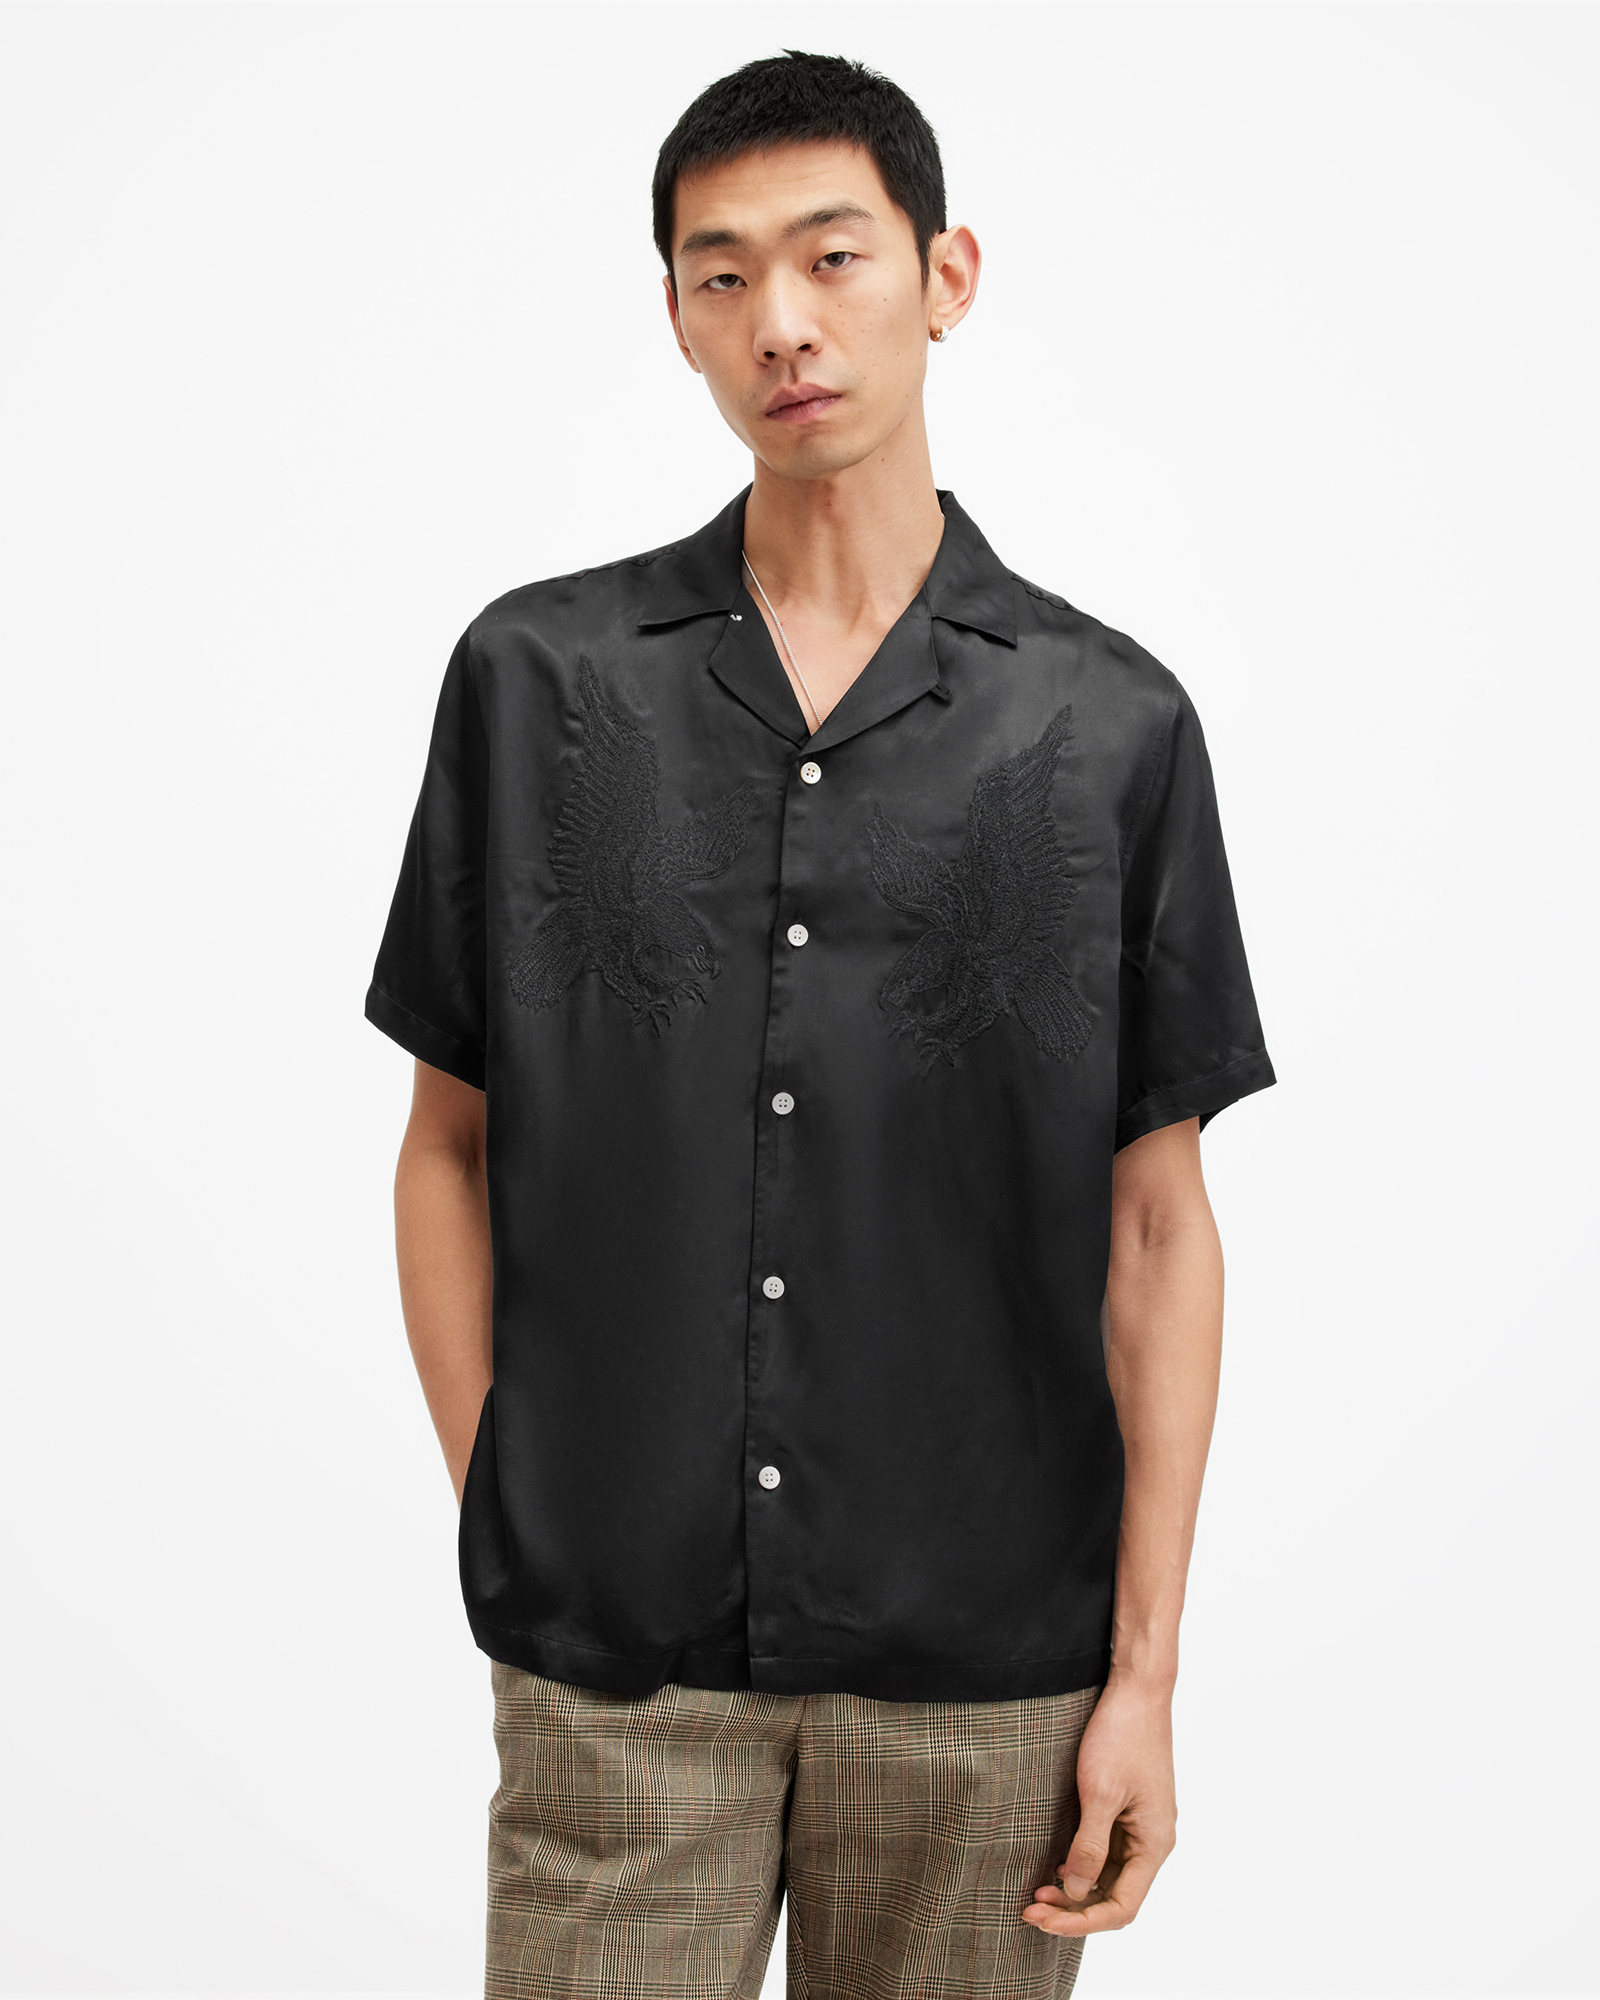 AllSaints Aquila Embroidered Relaxed Fit Shirt,, Jet Black